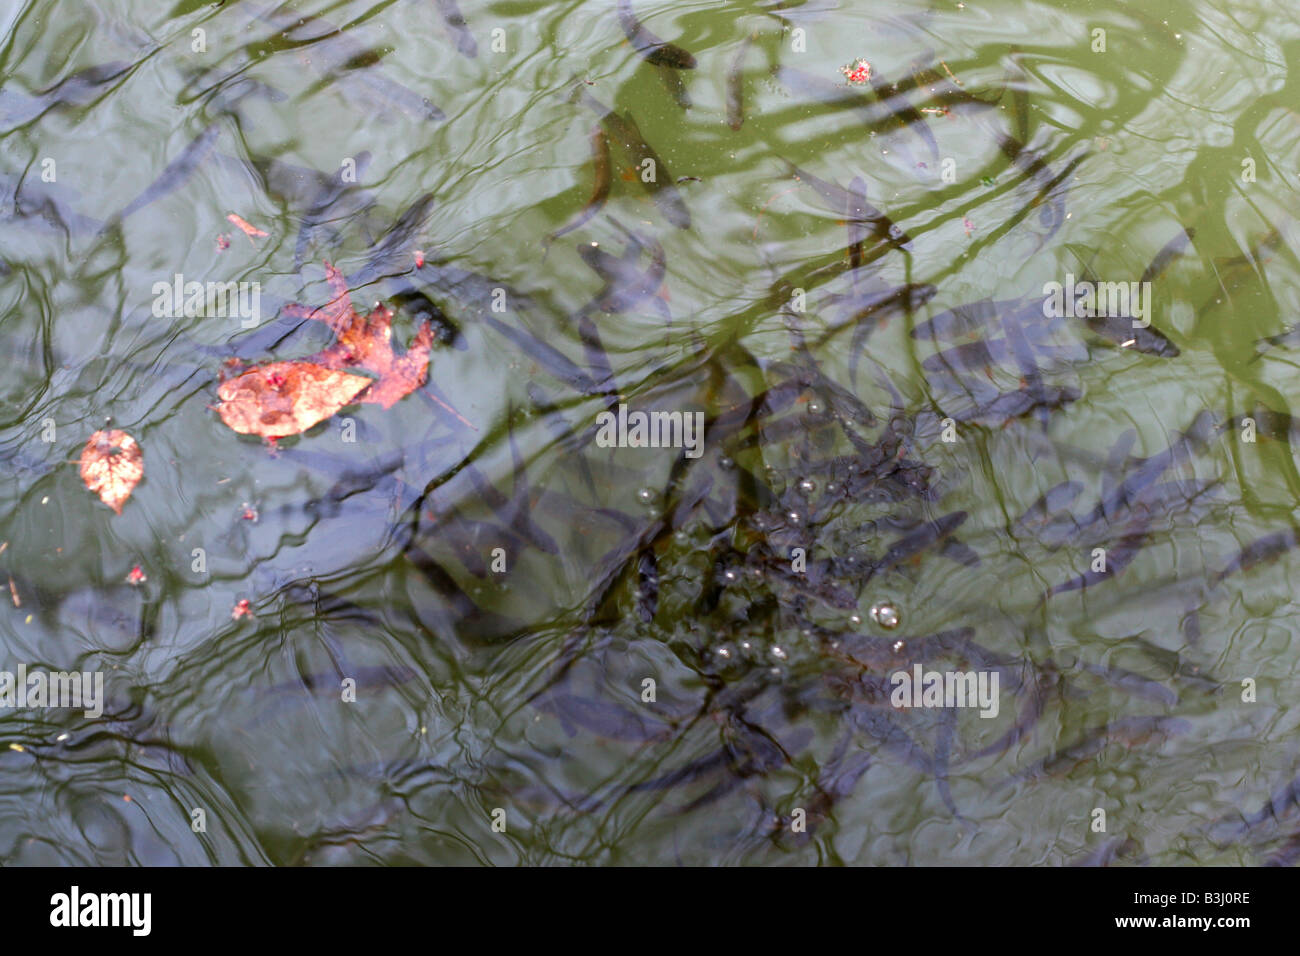 A community of fish swimming under the surface of the water Stock Photo